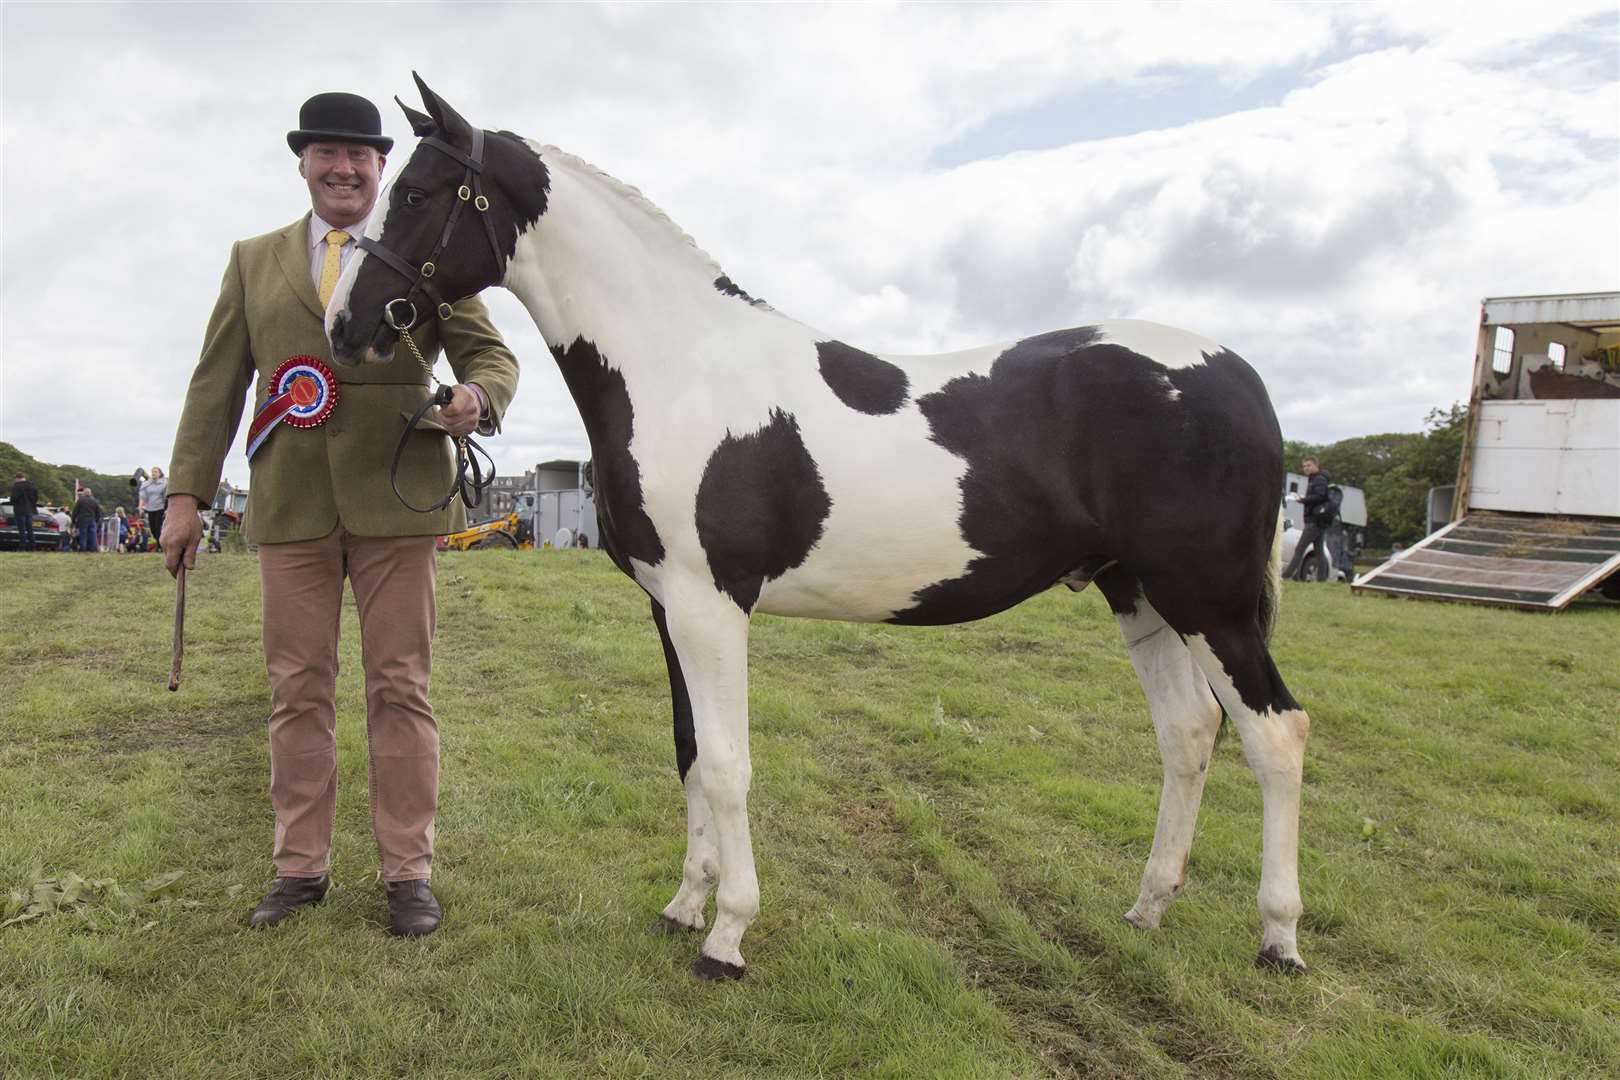 Russell Skelton of Team Skelton with Geraldine Harrold's horse, Independent Boy, which took the supreme horse championship. Picture: Ann-Marie Jones / Northern Studios